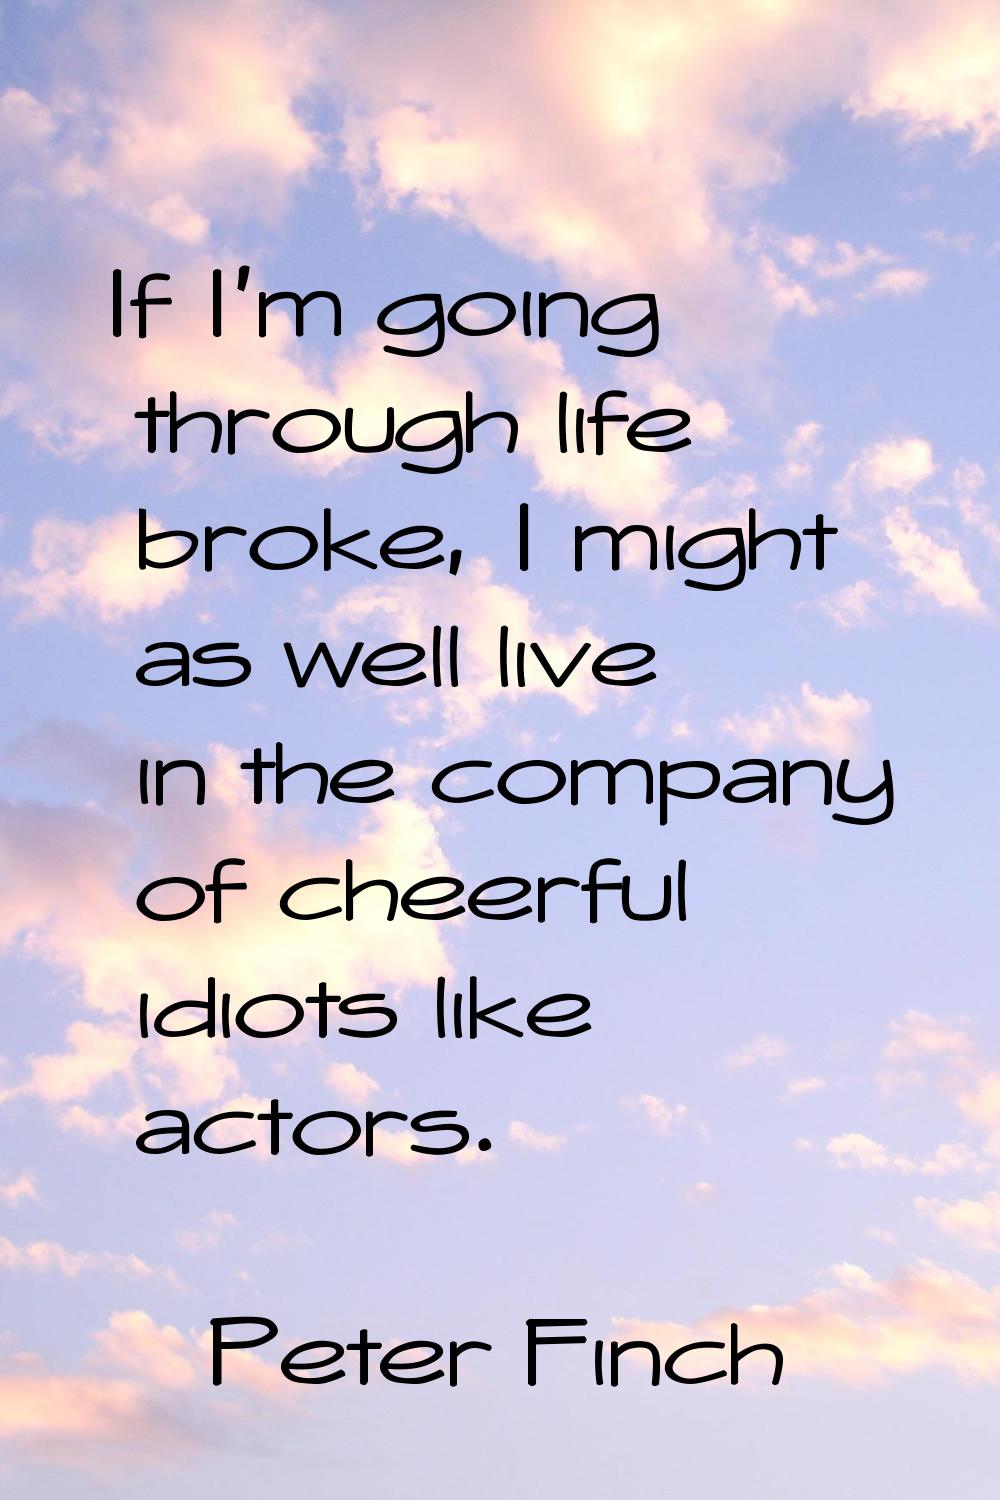 If I'm going through life broke, I might as well live in the company of cheerful idiots like actors